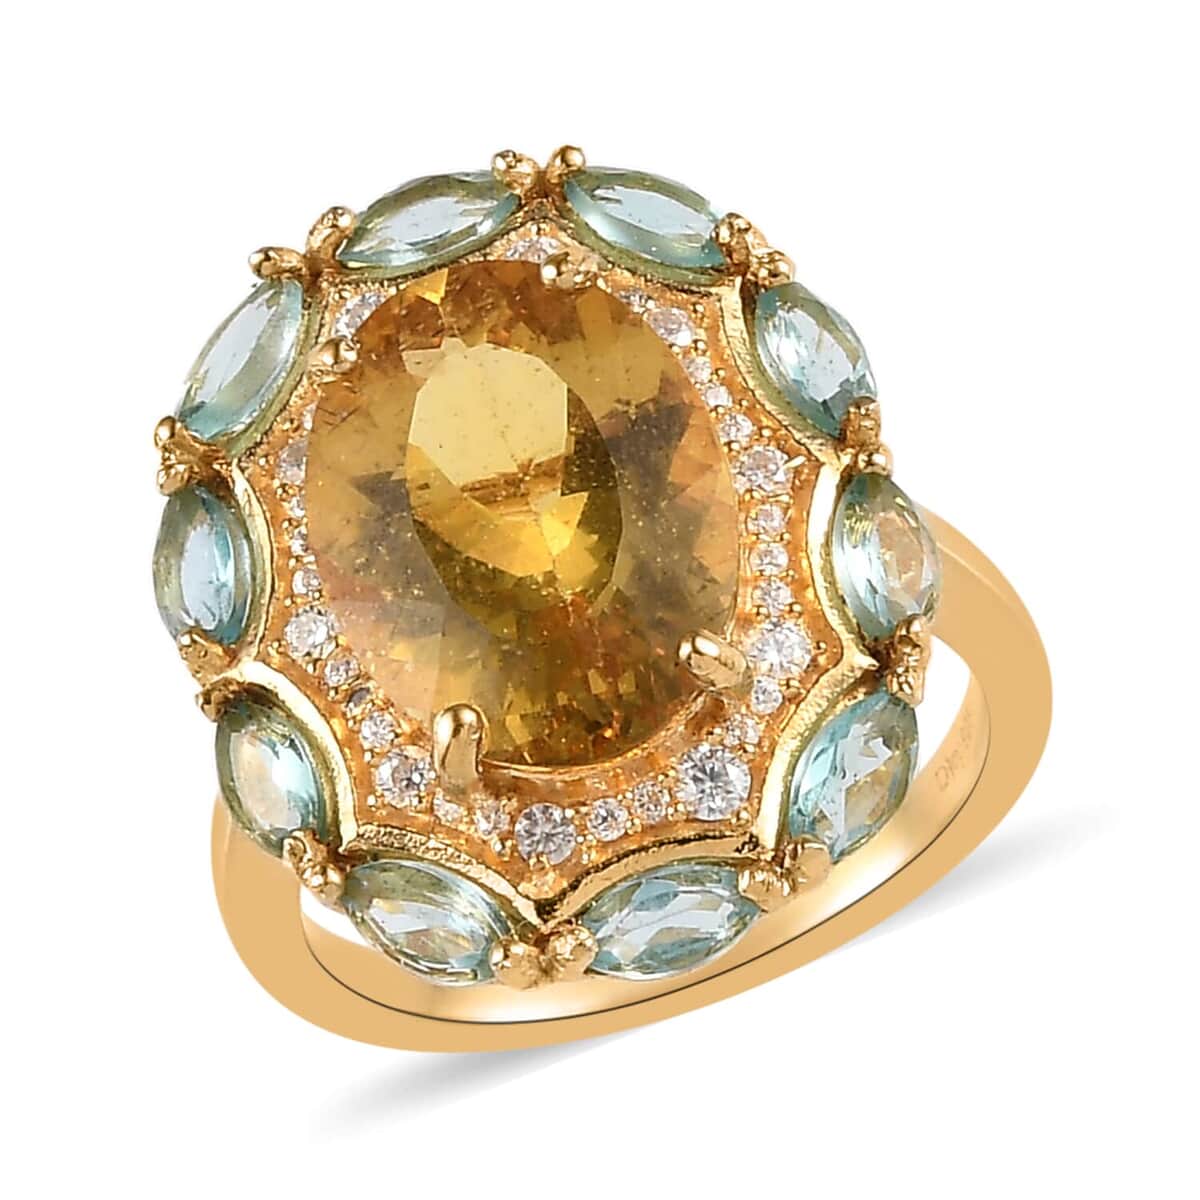 Premium Brazilian Golden Apatite and Multi Gemstone Ring in Vermeil Yellow Gold Over Sterling Silver 8.00 ctw (Delivery in 3-5 Business Days) image number 0